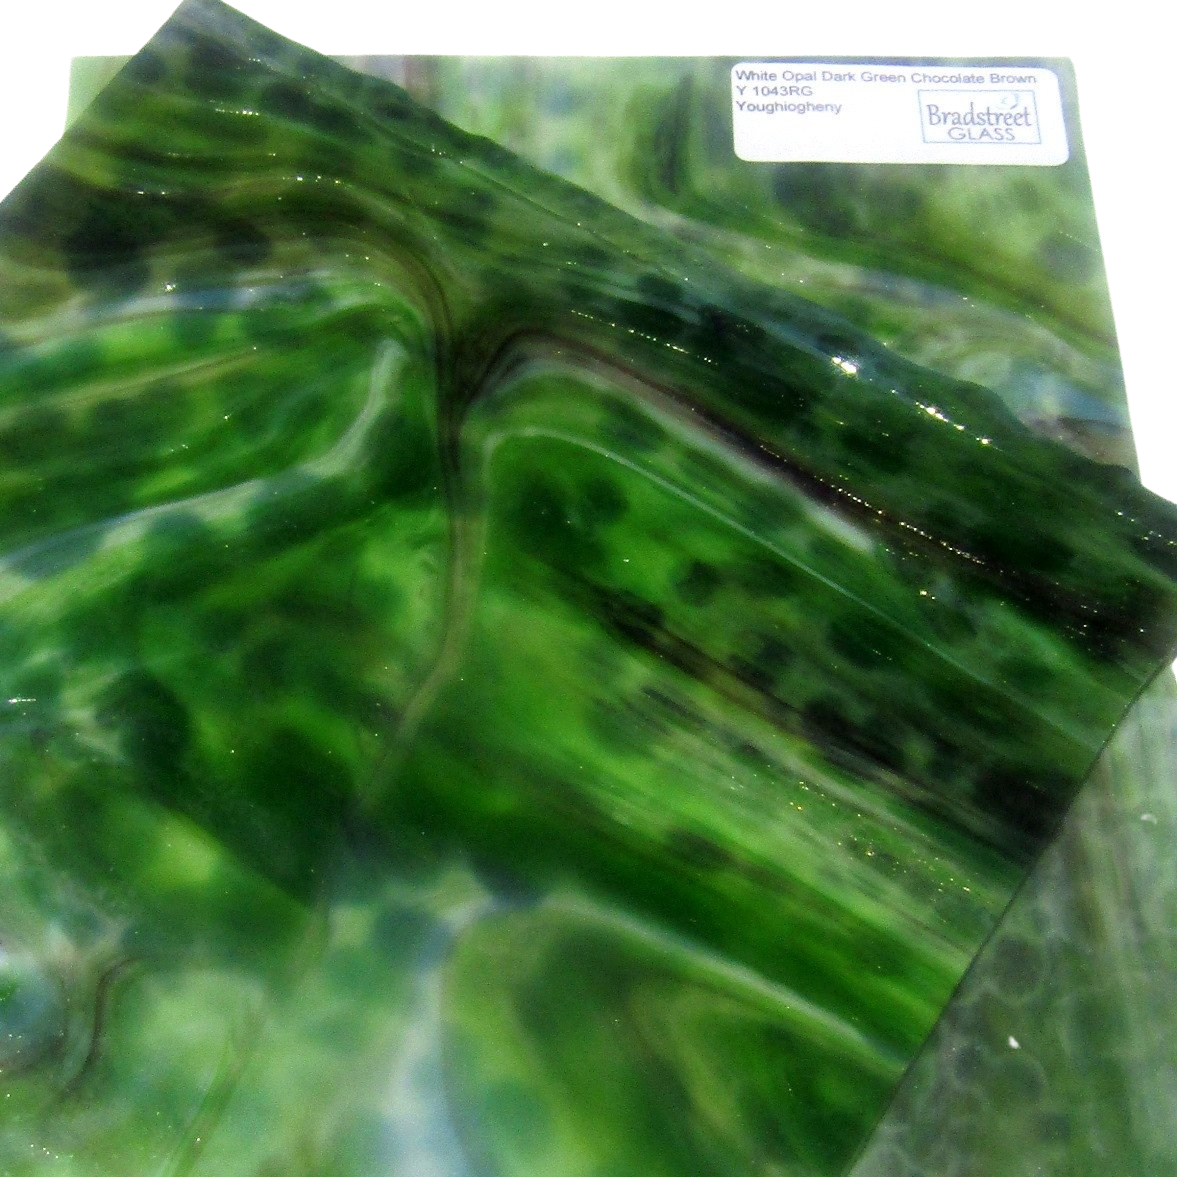 White Opal Dark Green Chocolate Brown Stained Glass Sheet Youghiogheny 1043RG